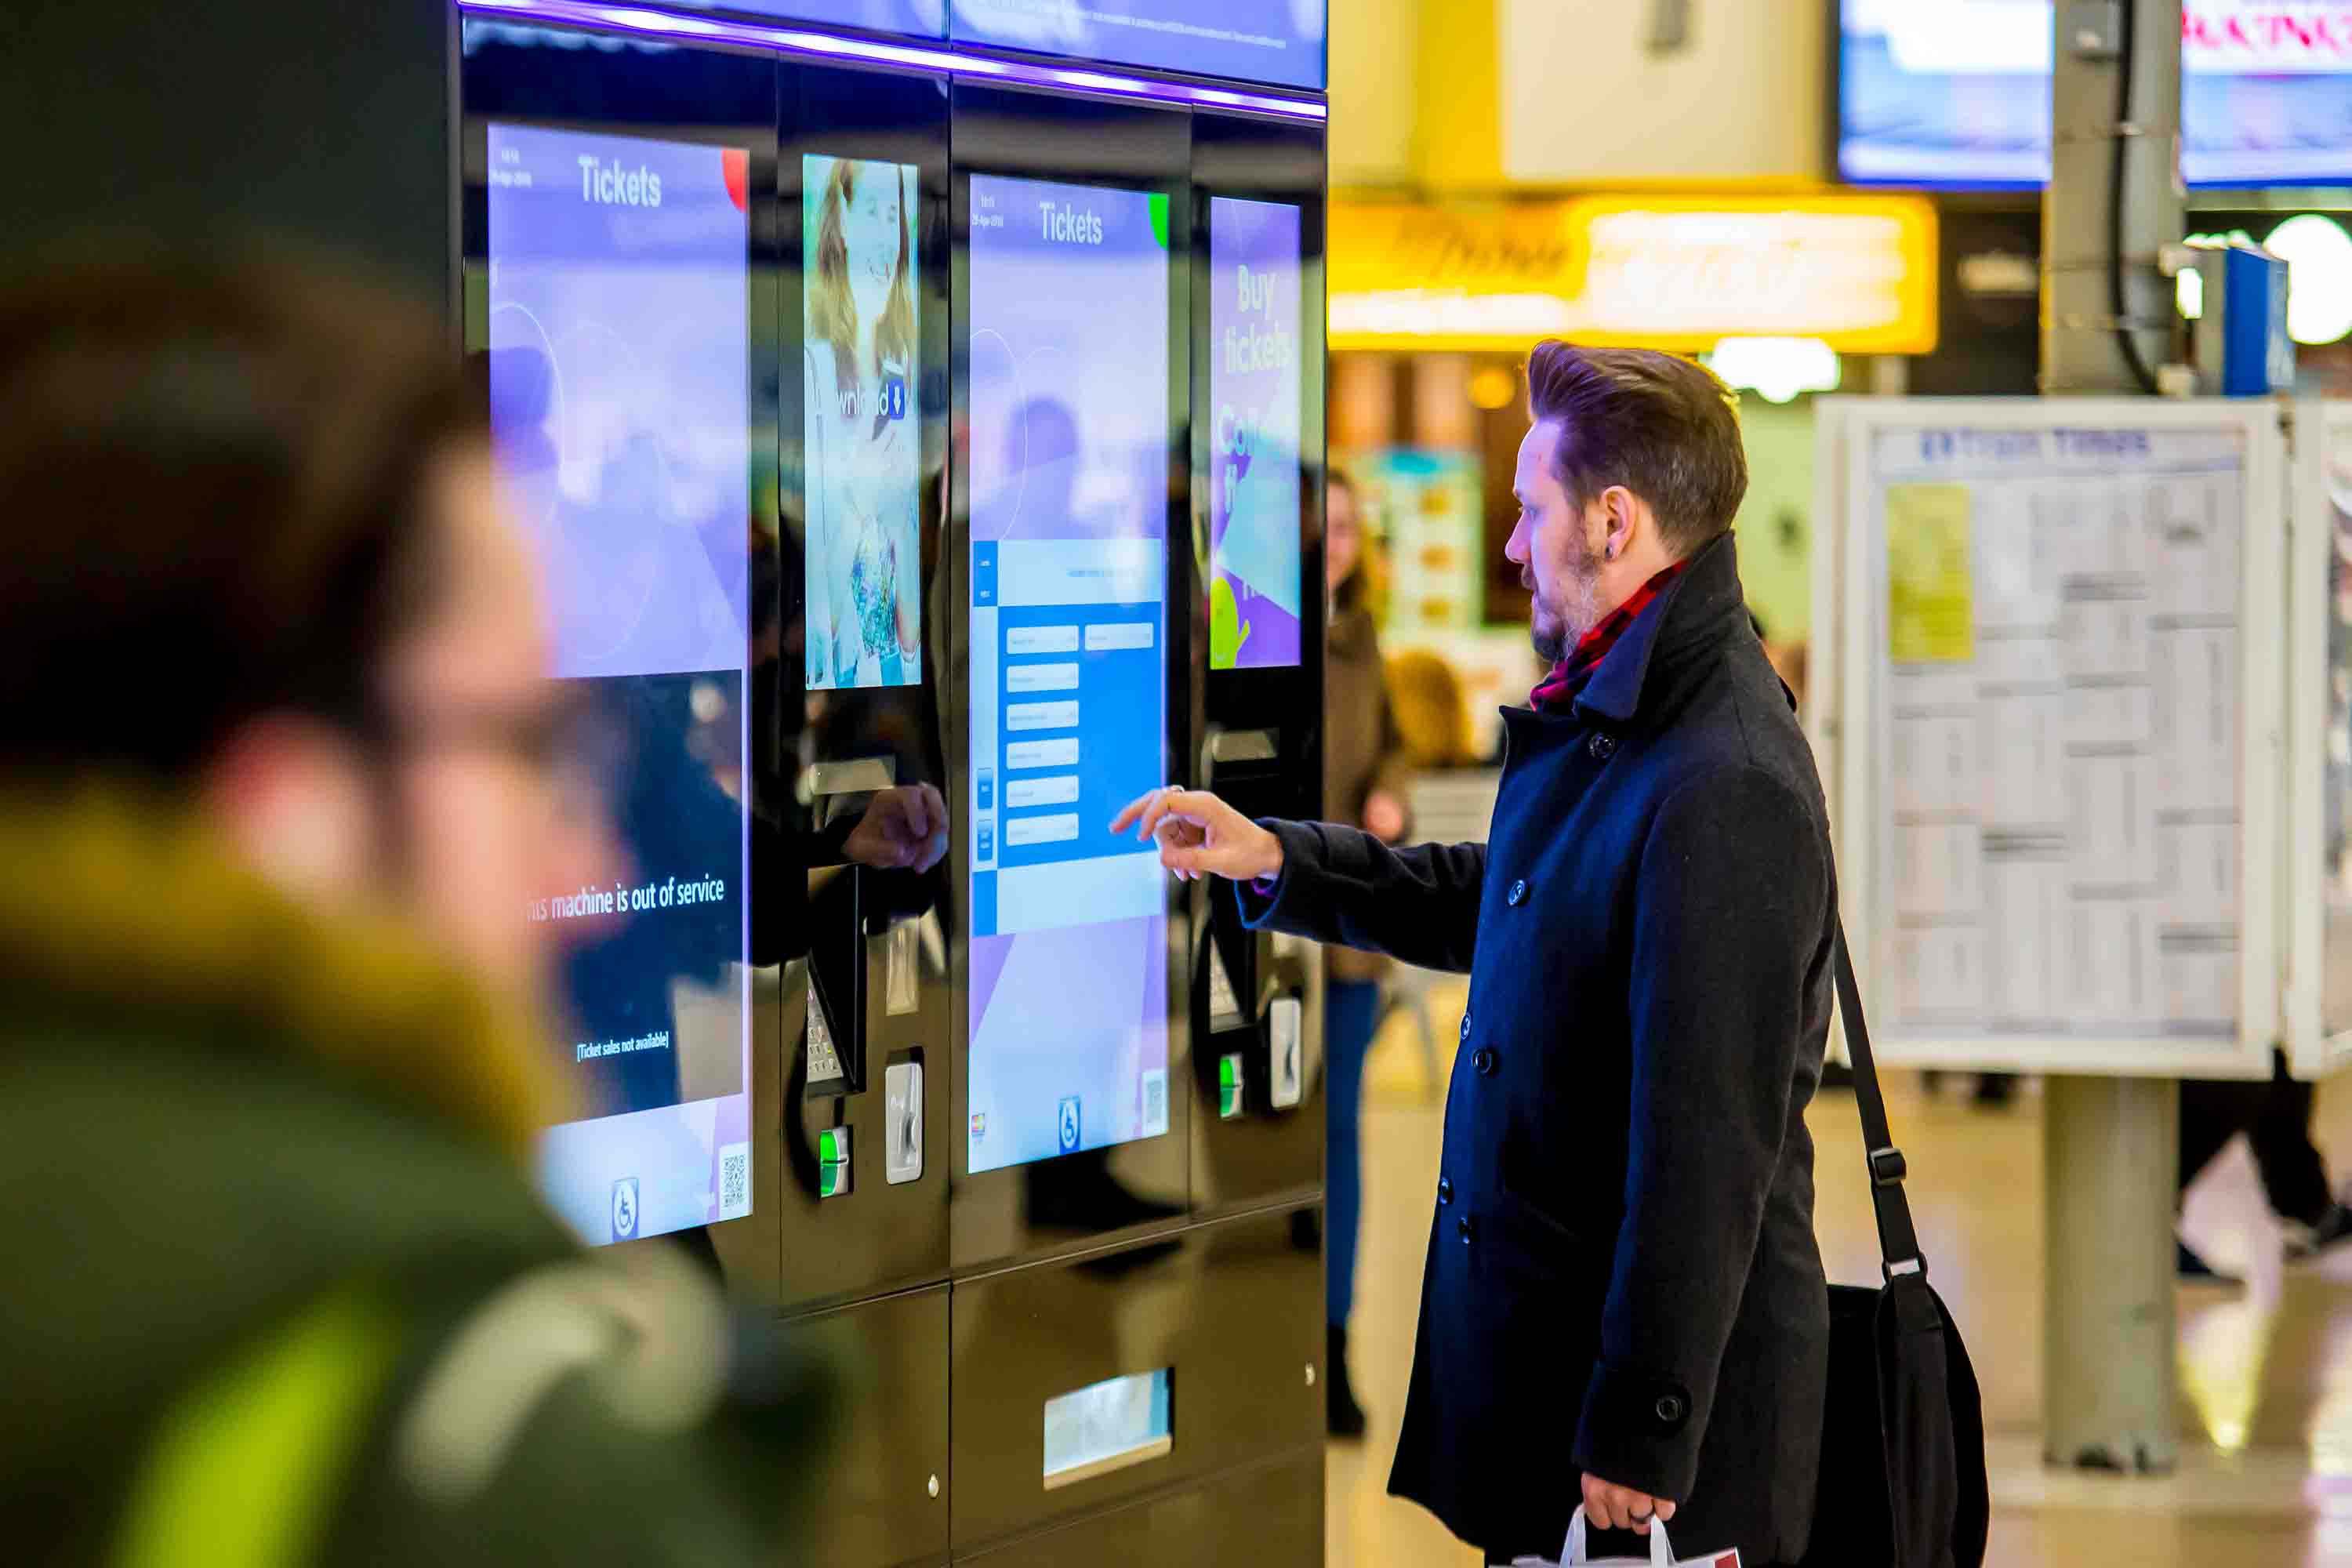 Customer using a ticket vending machine at a train station